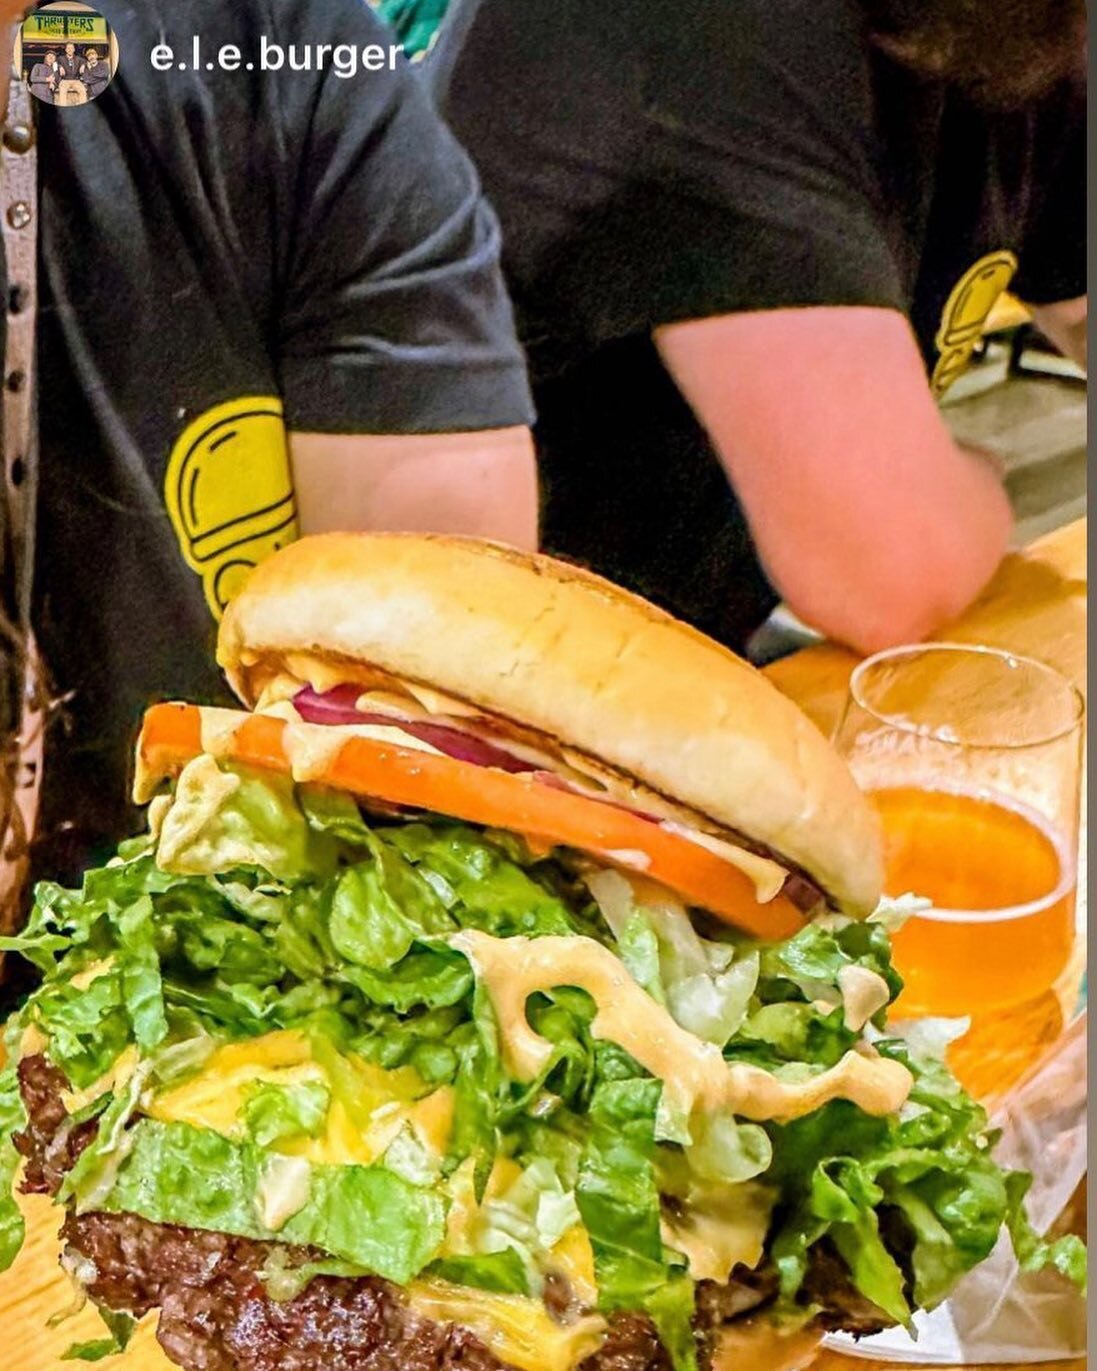 Stop by for smashburger today! Open daily from noon to 8:30pm, located @mahaloaleworks outside on the patio!!
Come by for a delicious fresh beer and a sausage, tacos or a smashburger (pictured)! The sunsets have been firing! 
Happy hump day! #beer #s